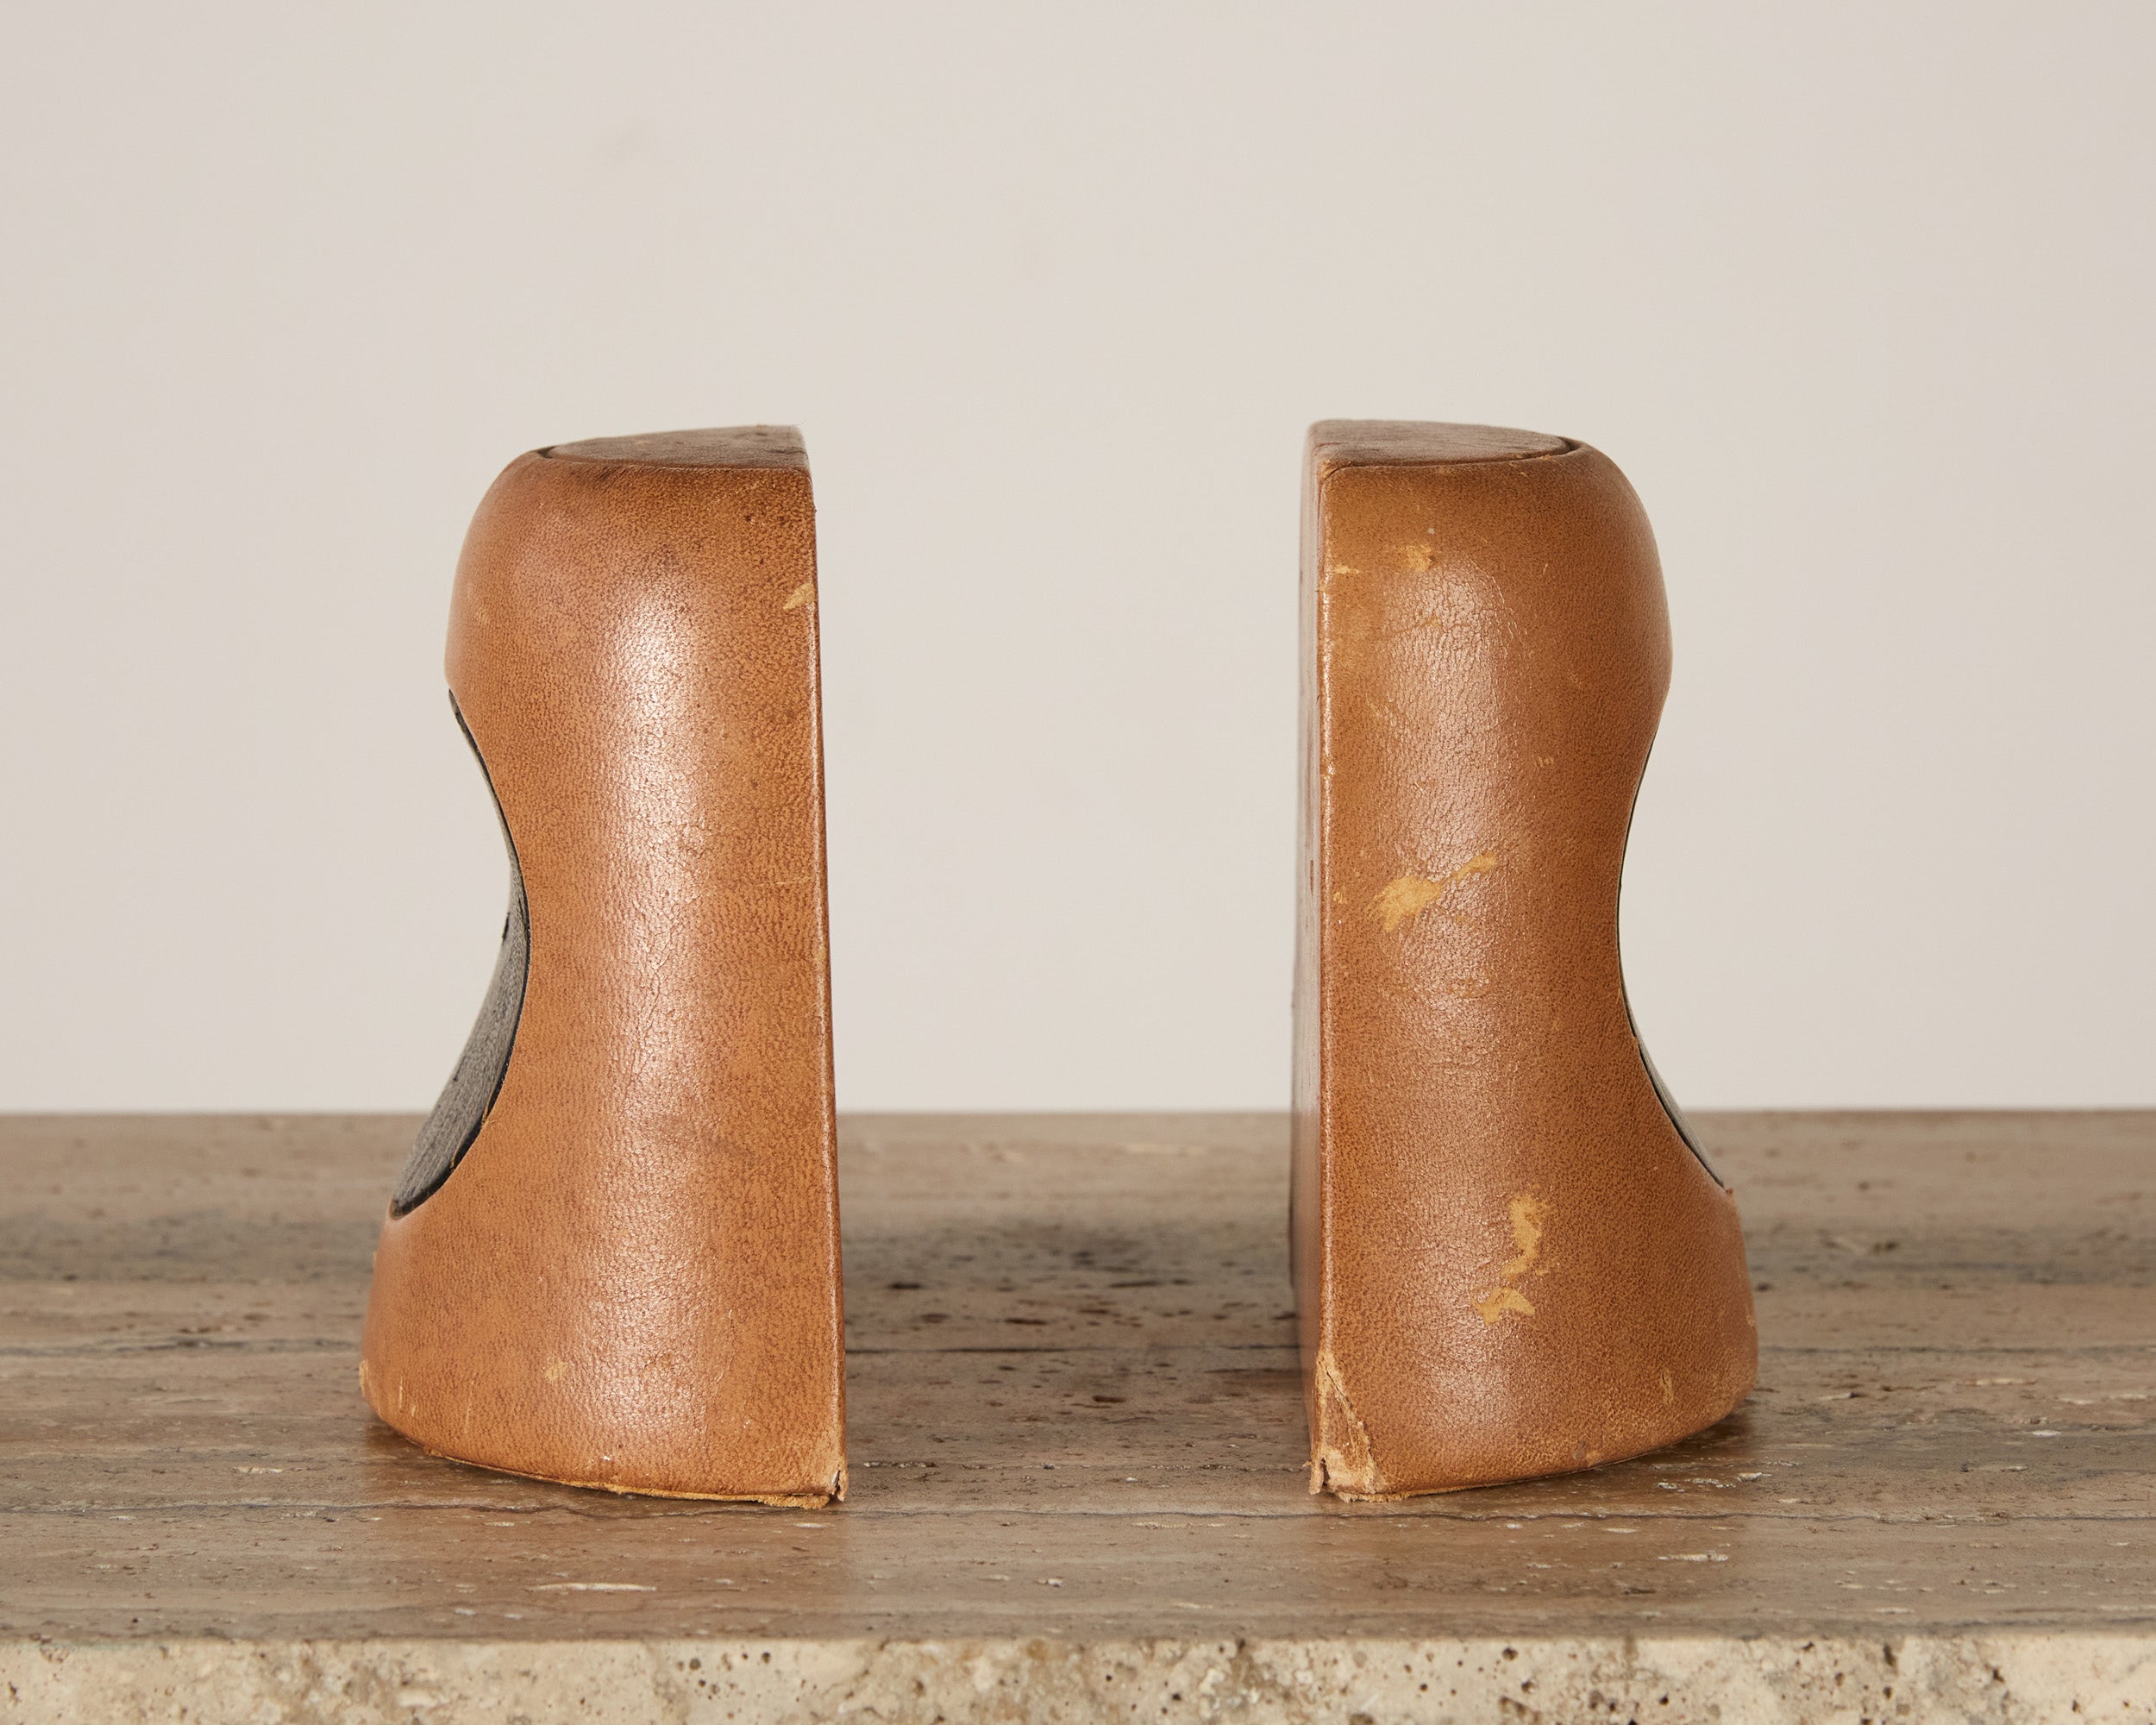 Pair of Patinated Leather Bookends